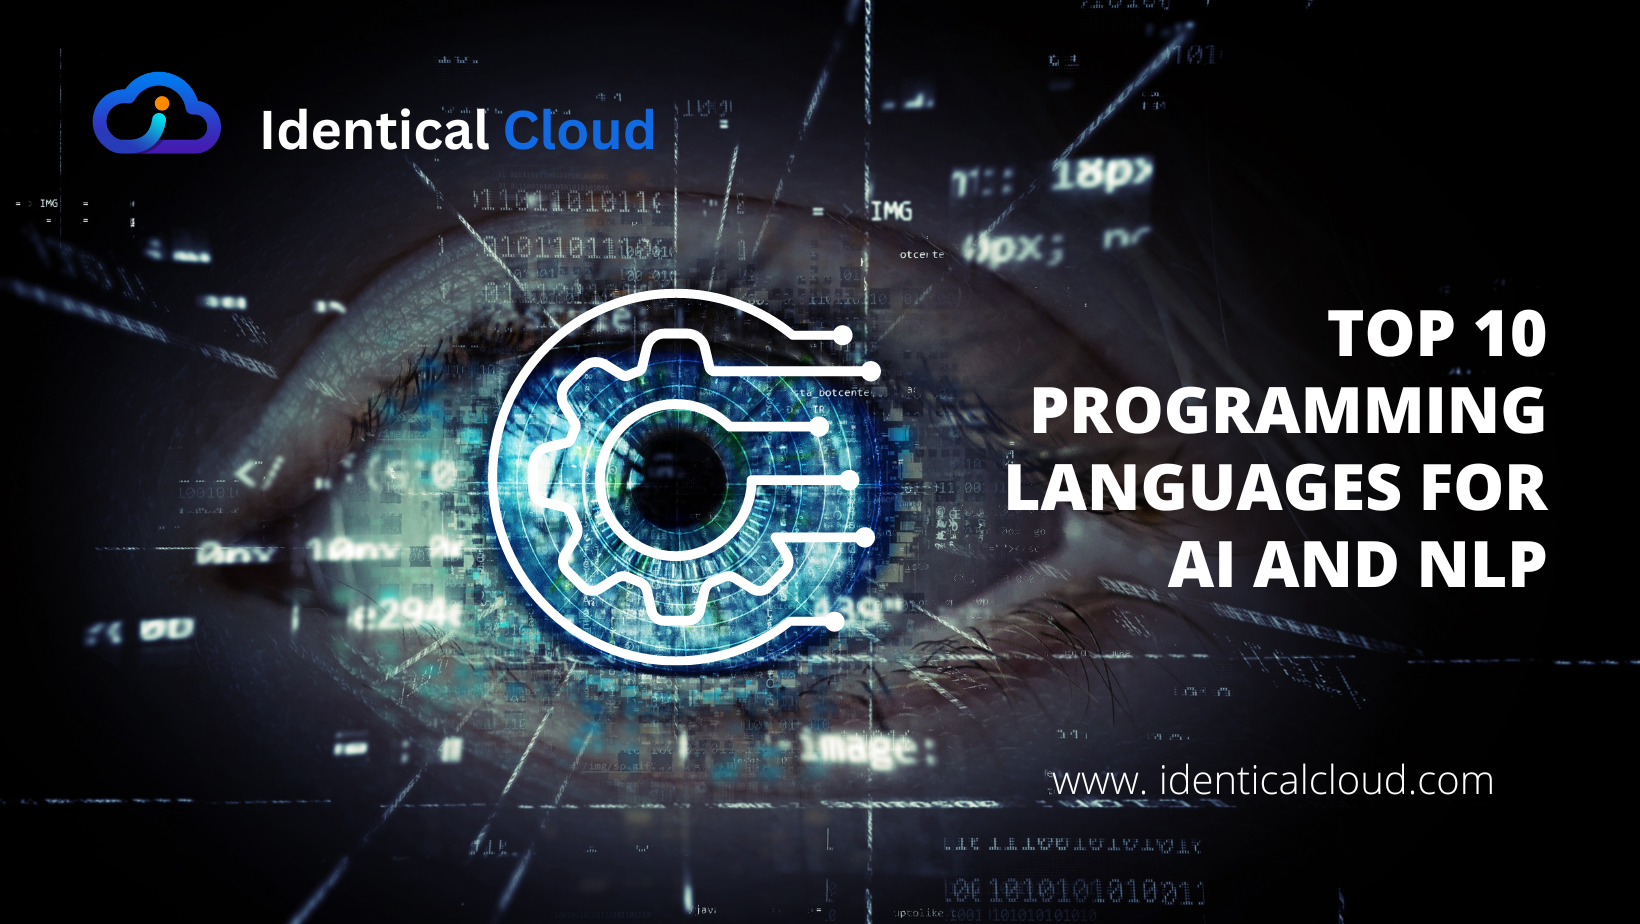 Top 10 Programming Languages for AI and NLP - identicalcloud.com